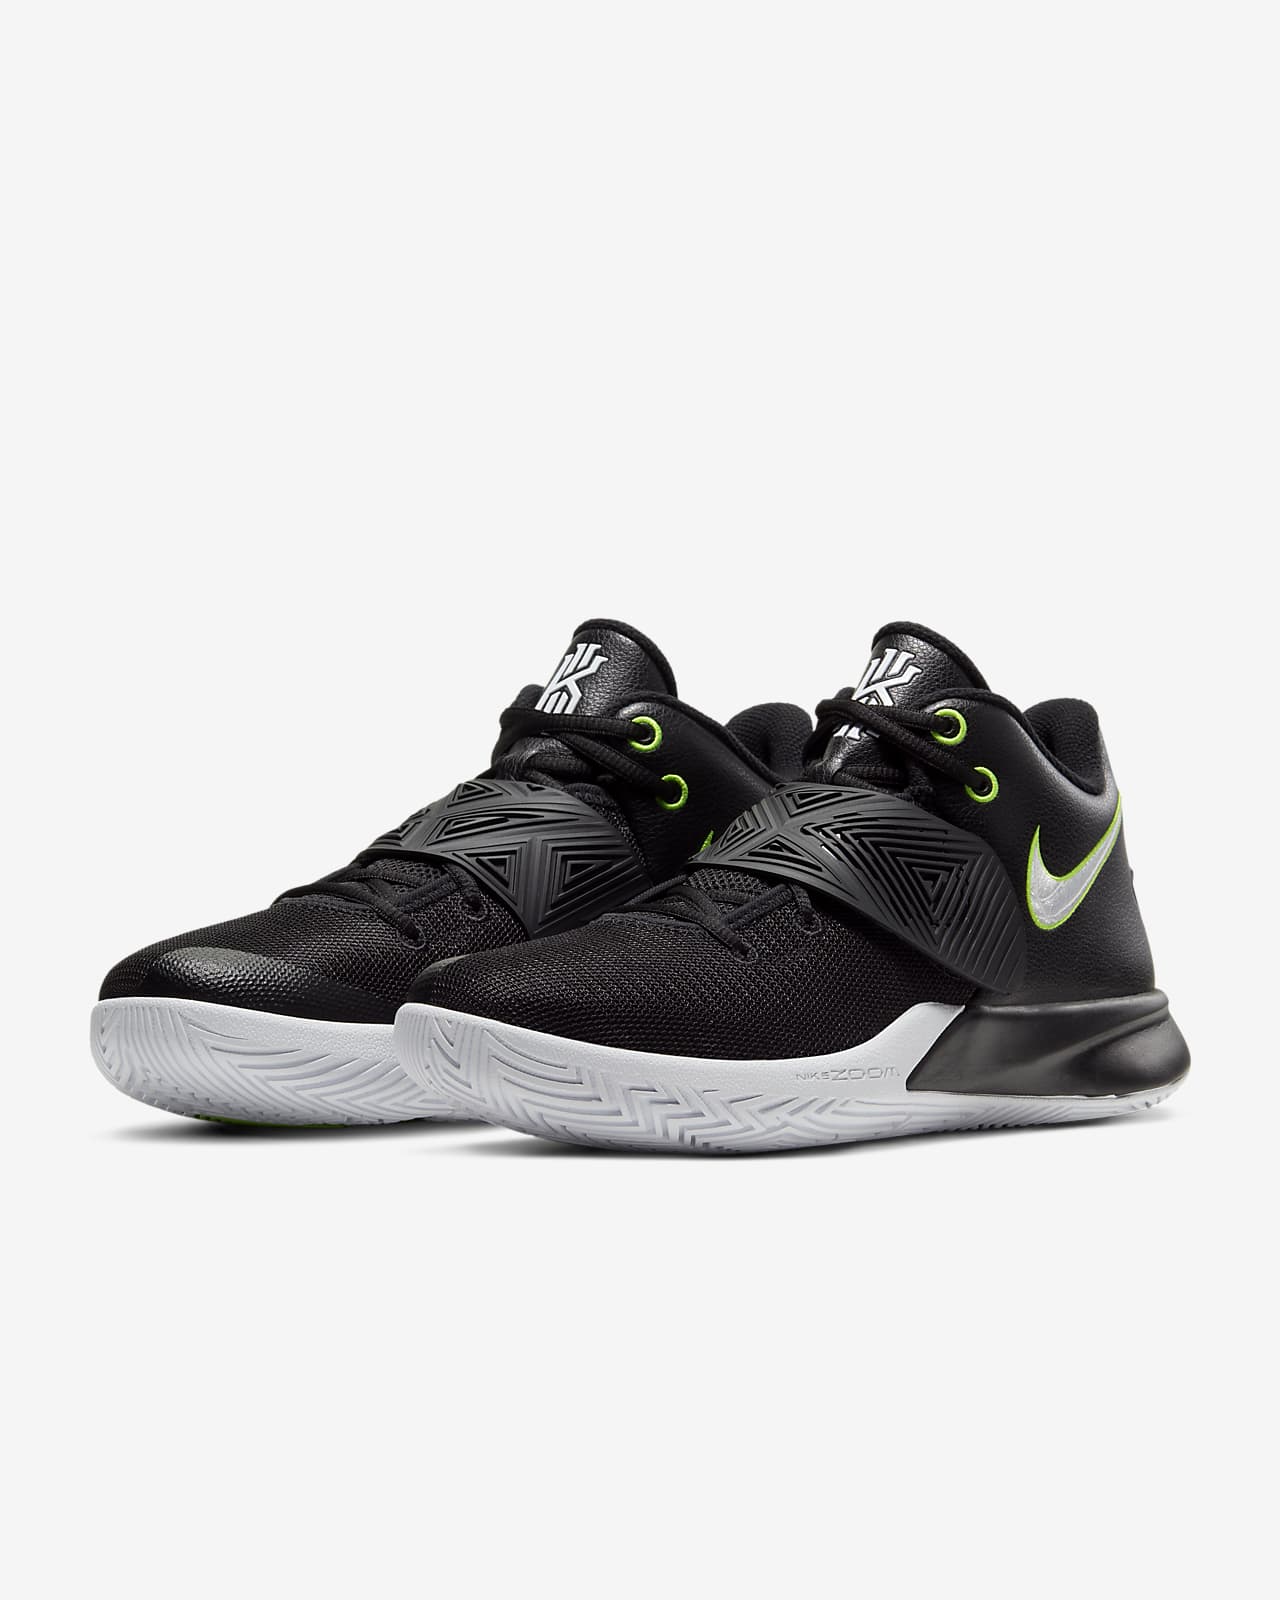 nike kyrie black and green